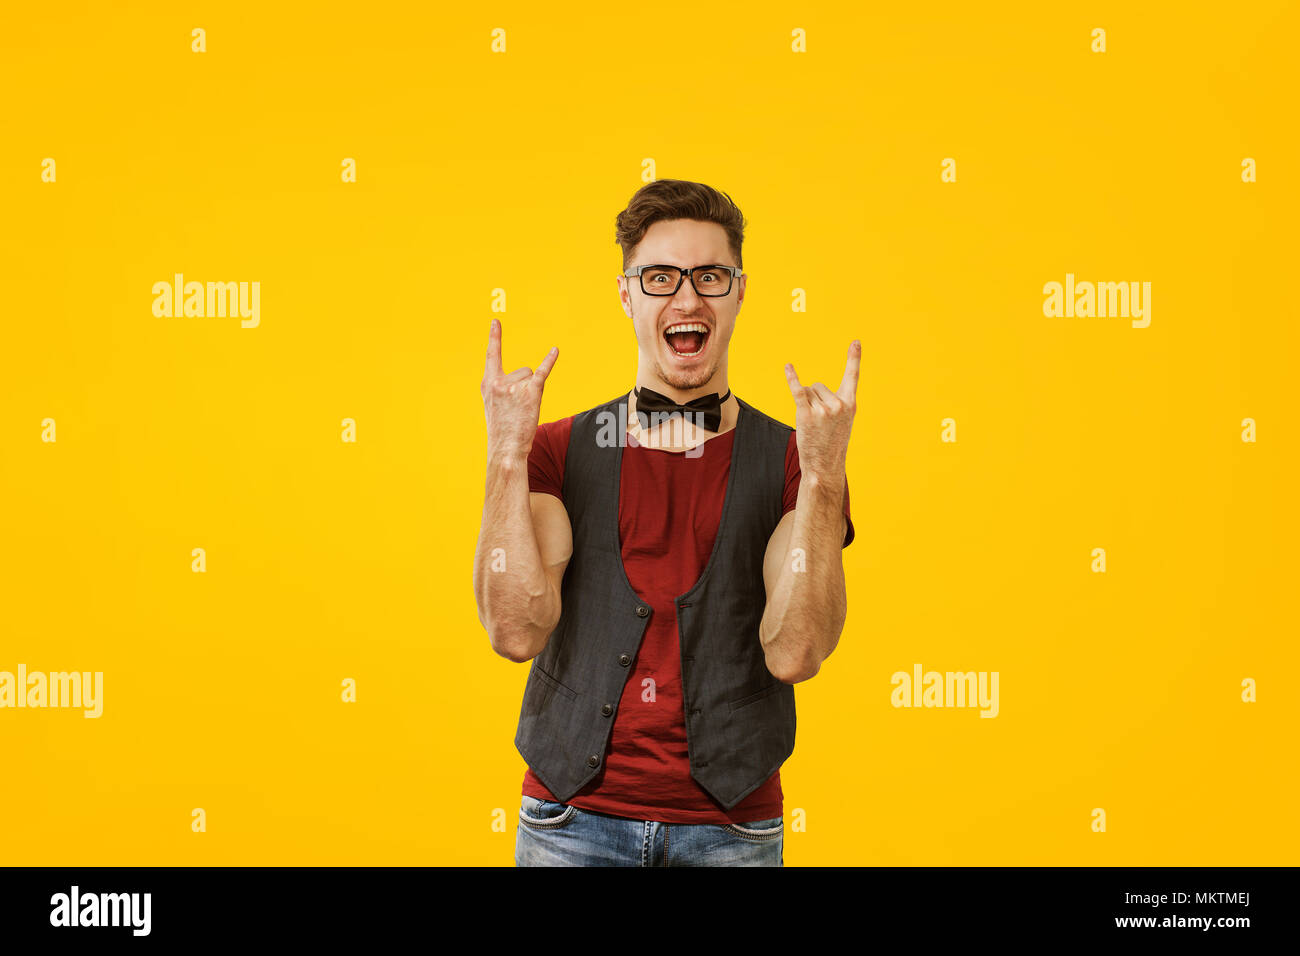 Portrait of young man in stylish cool outfit and glasses posing expressively on yellow background Stock Photo